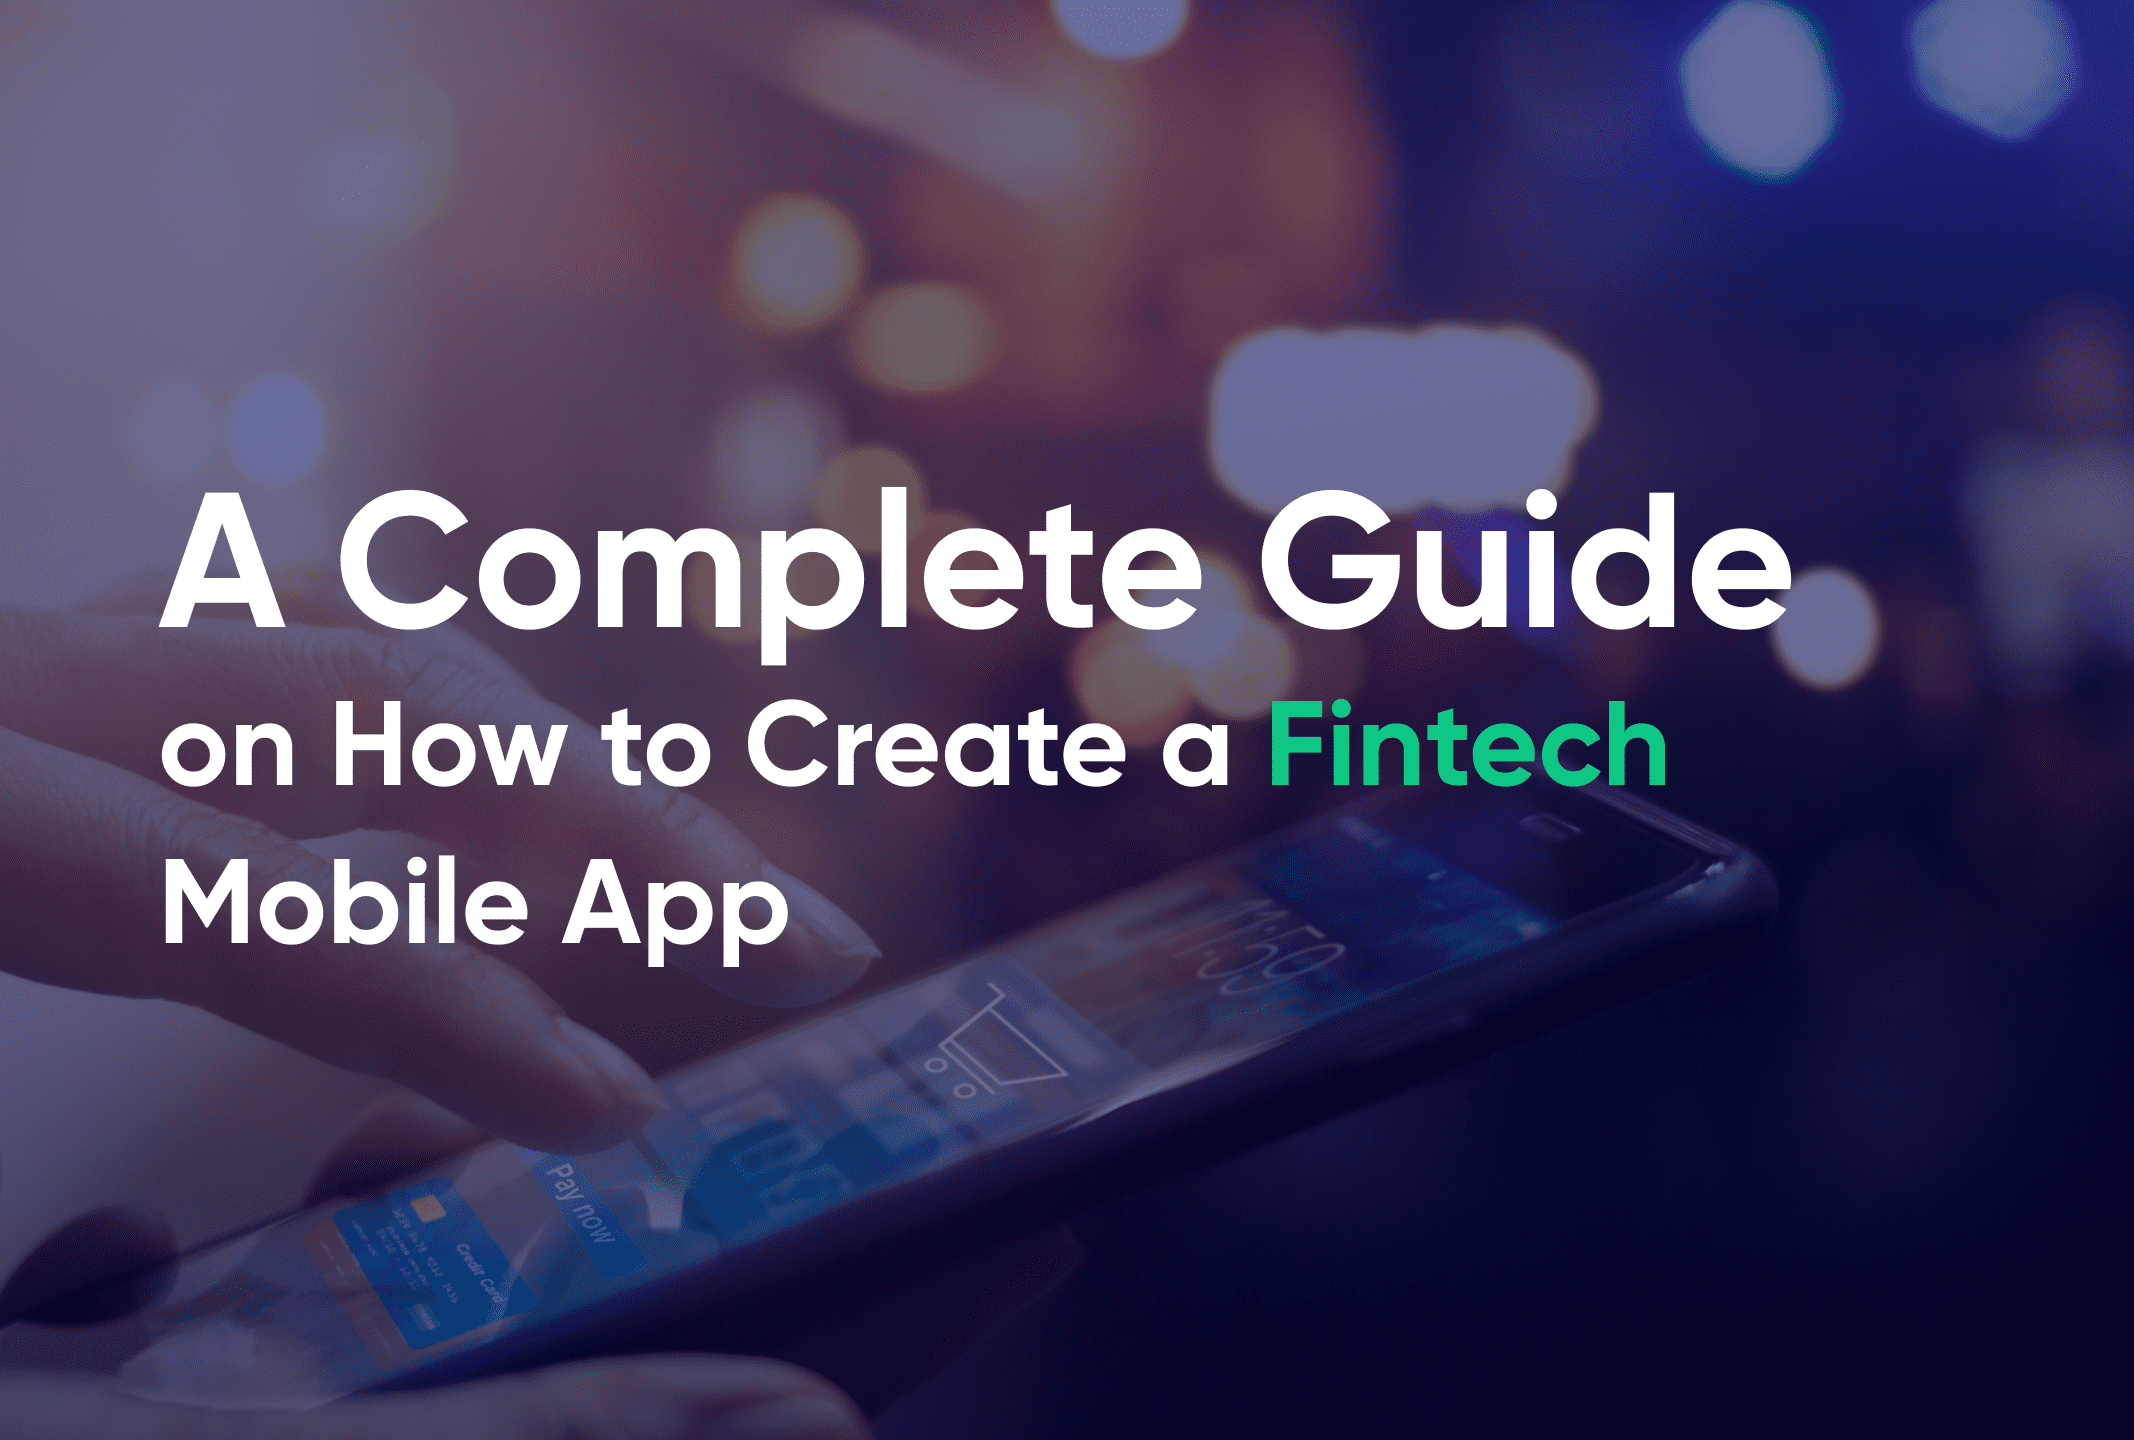 A Complete Guide on How to Create a Fintech Mobile App 2